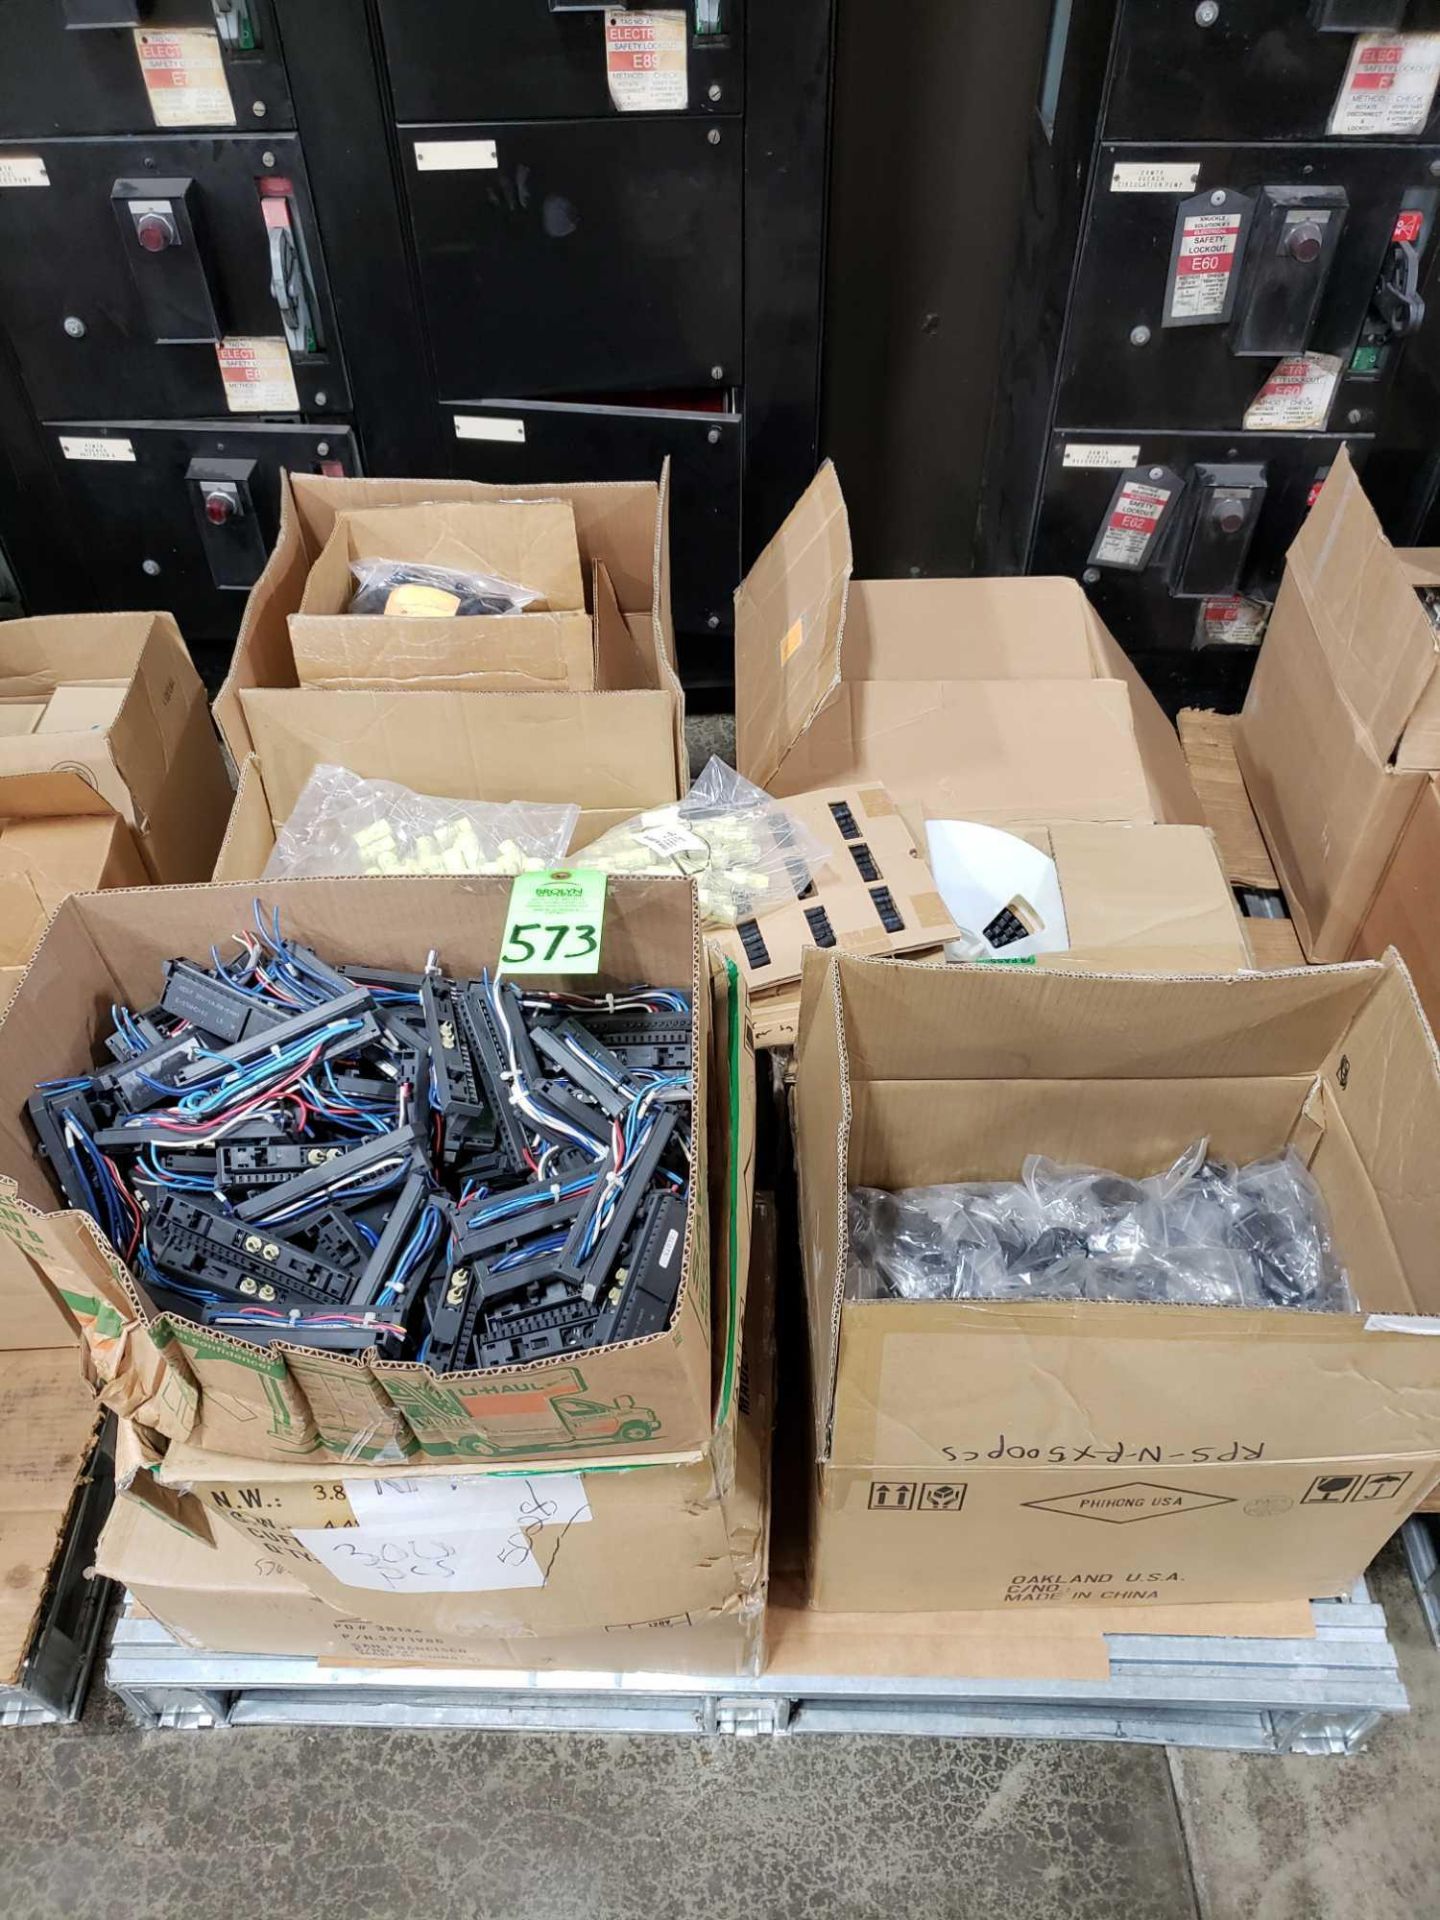 Pallet of assorted electrical parts.